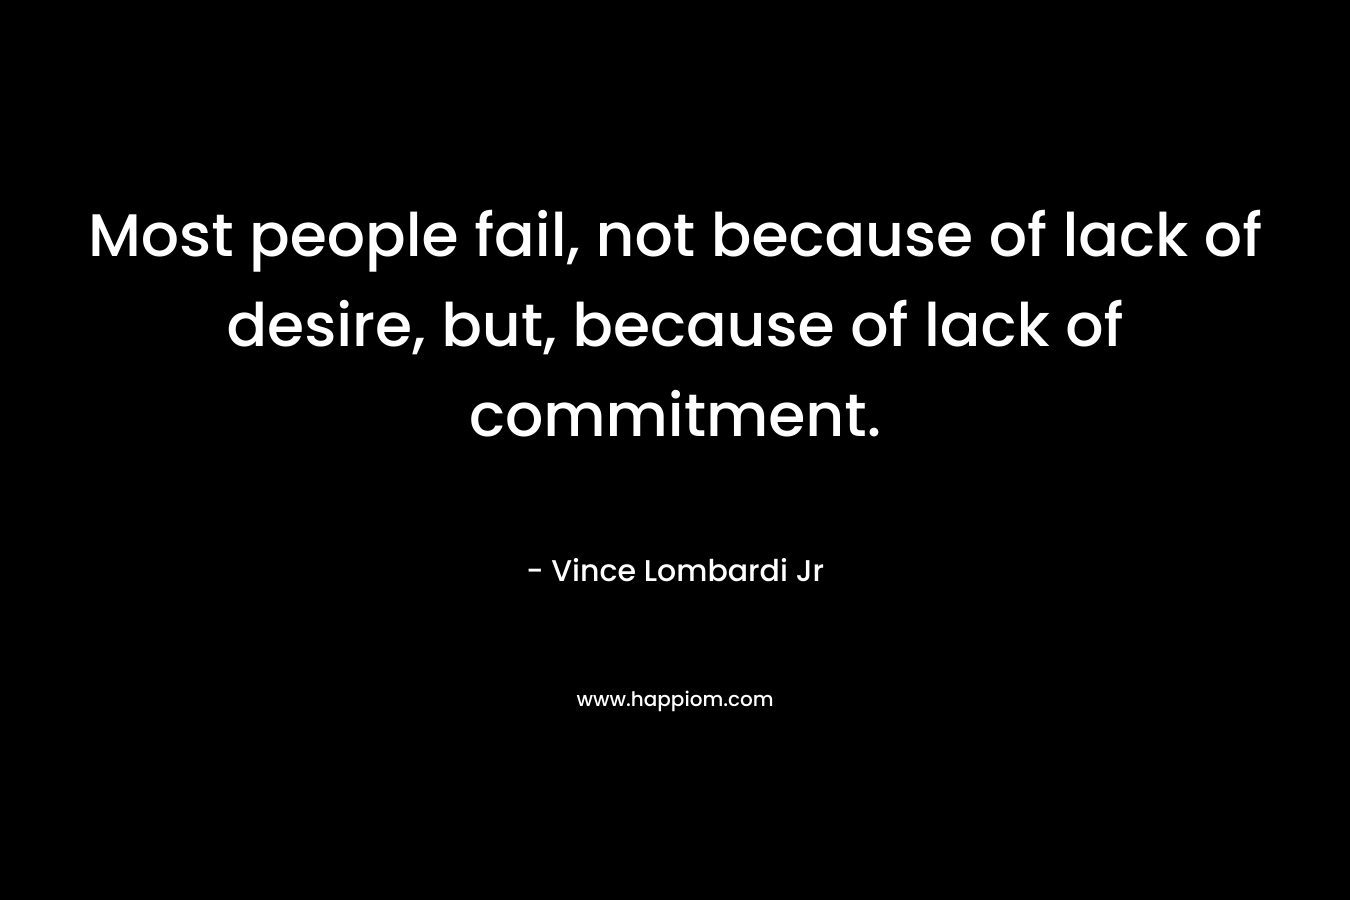 Most people fail, not because of lack of desire, but, because of lack of commitment.